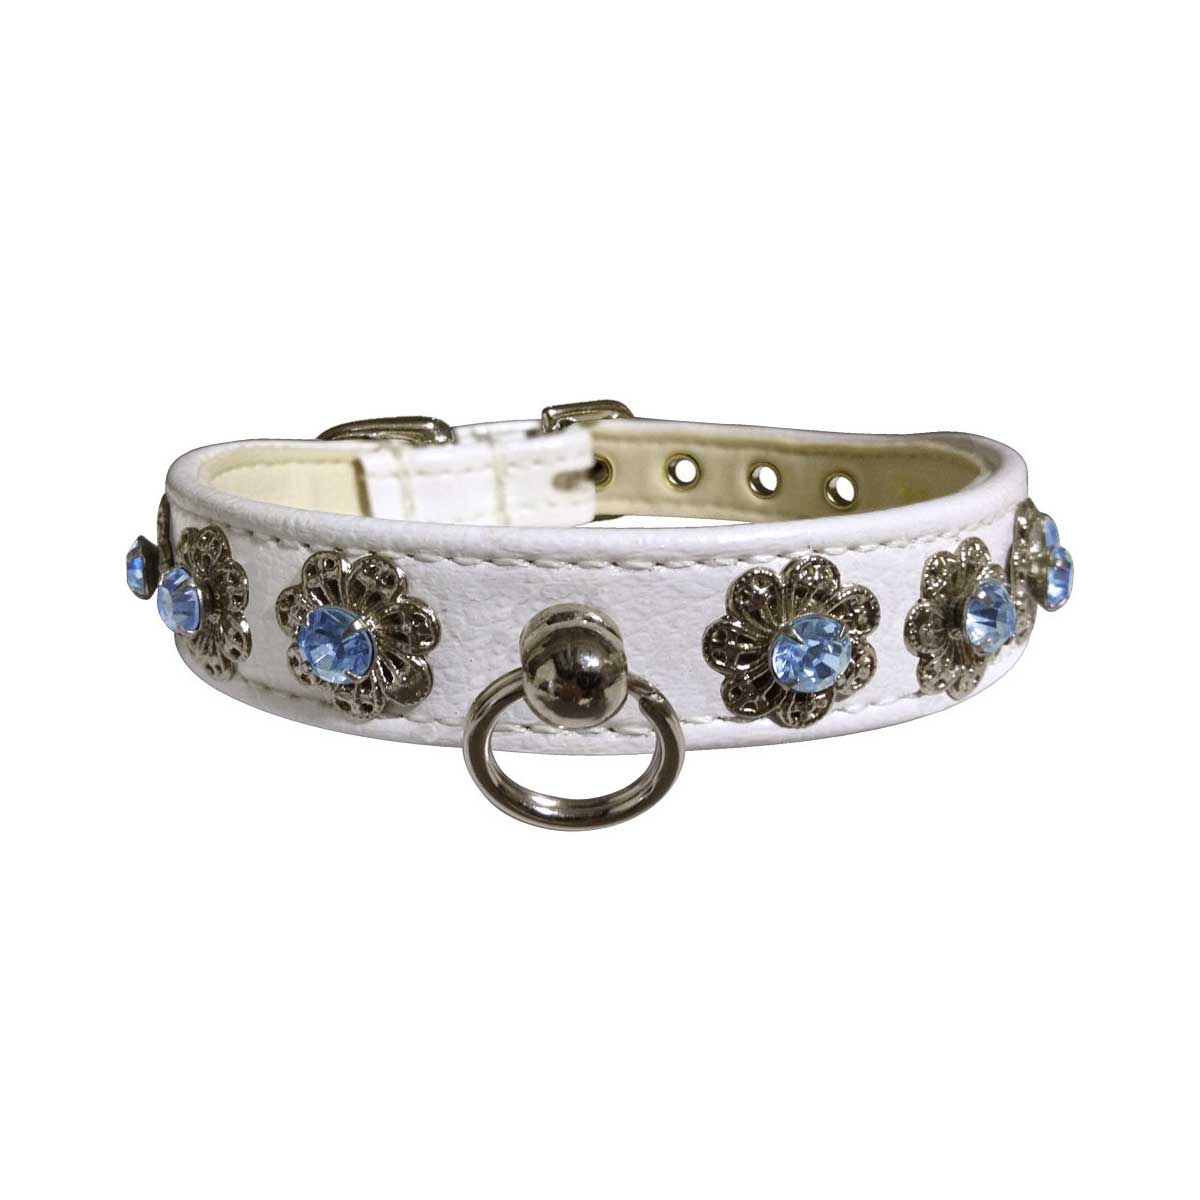 Starlite Faux Leather Collar with Crystal Flowers in White & Blue | Pawlicious & Company